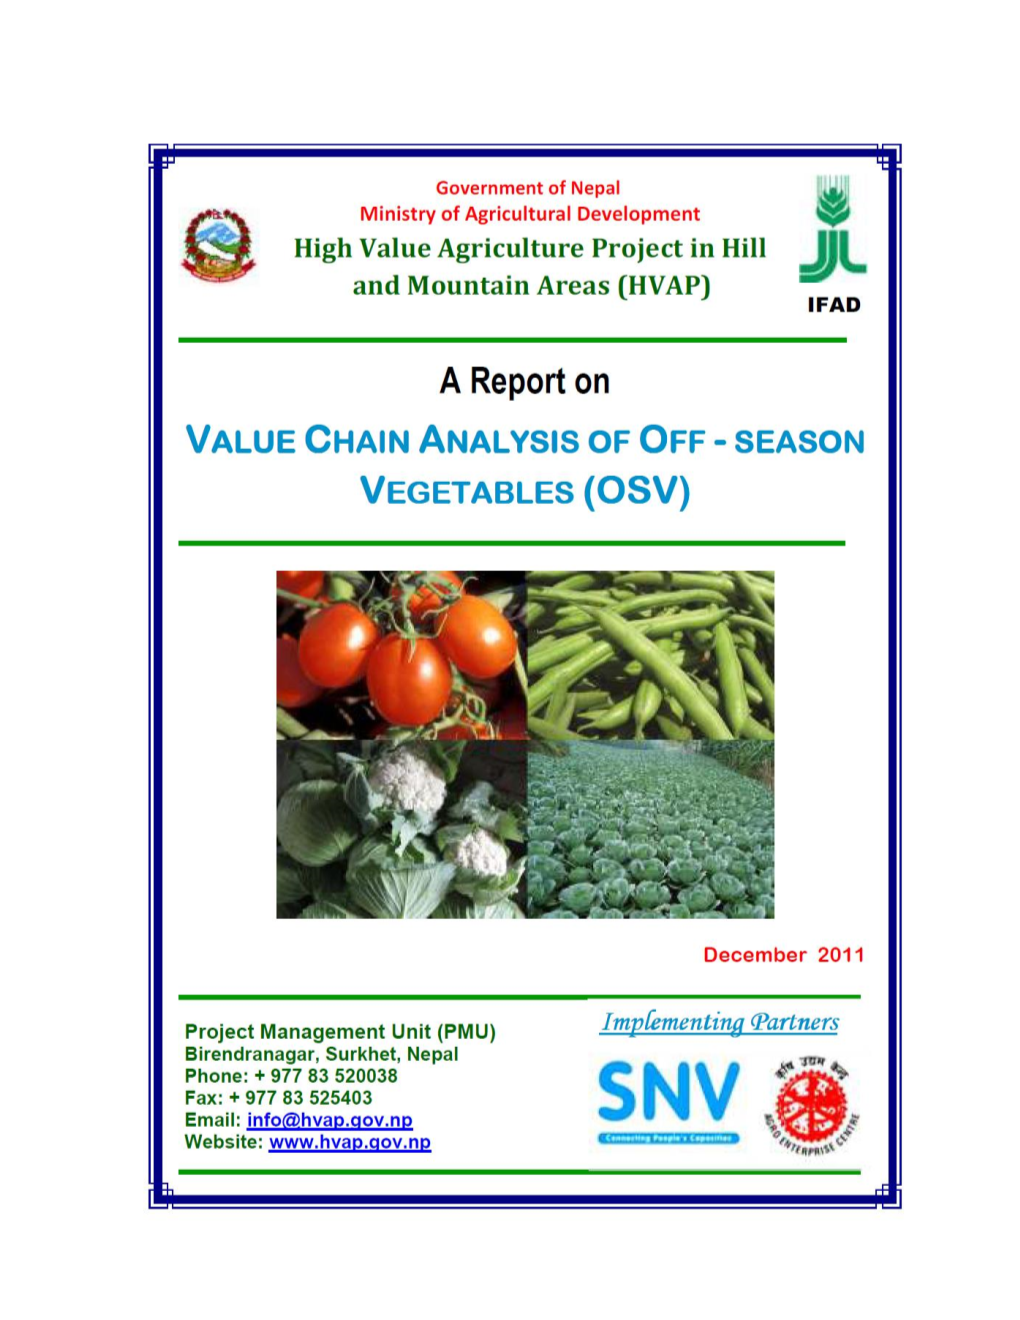 Report on Value Chain Analysis of Off-Season Vegetables